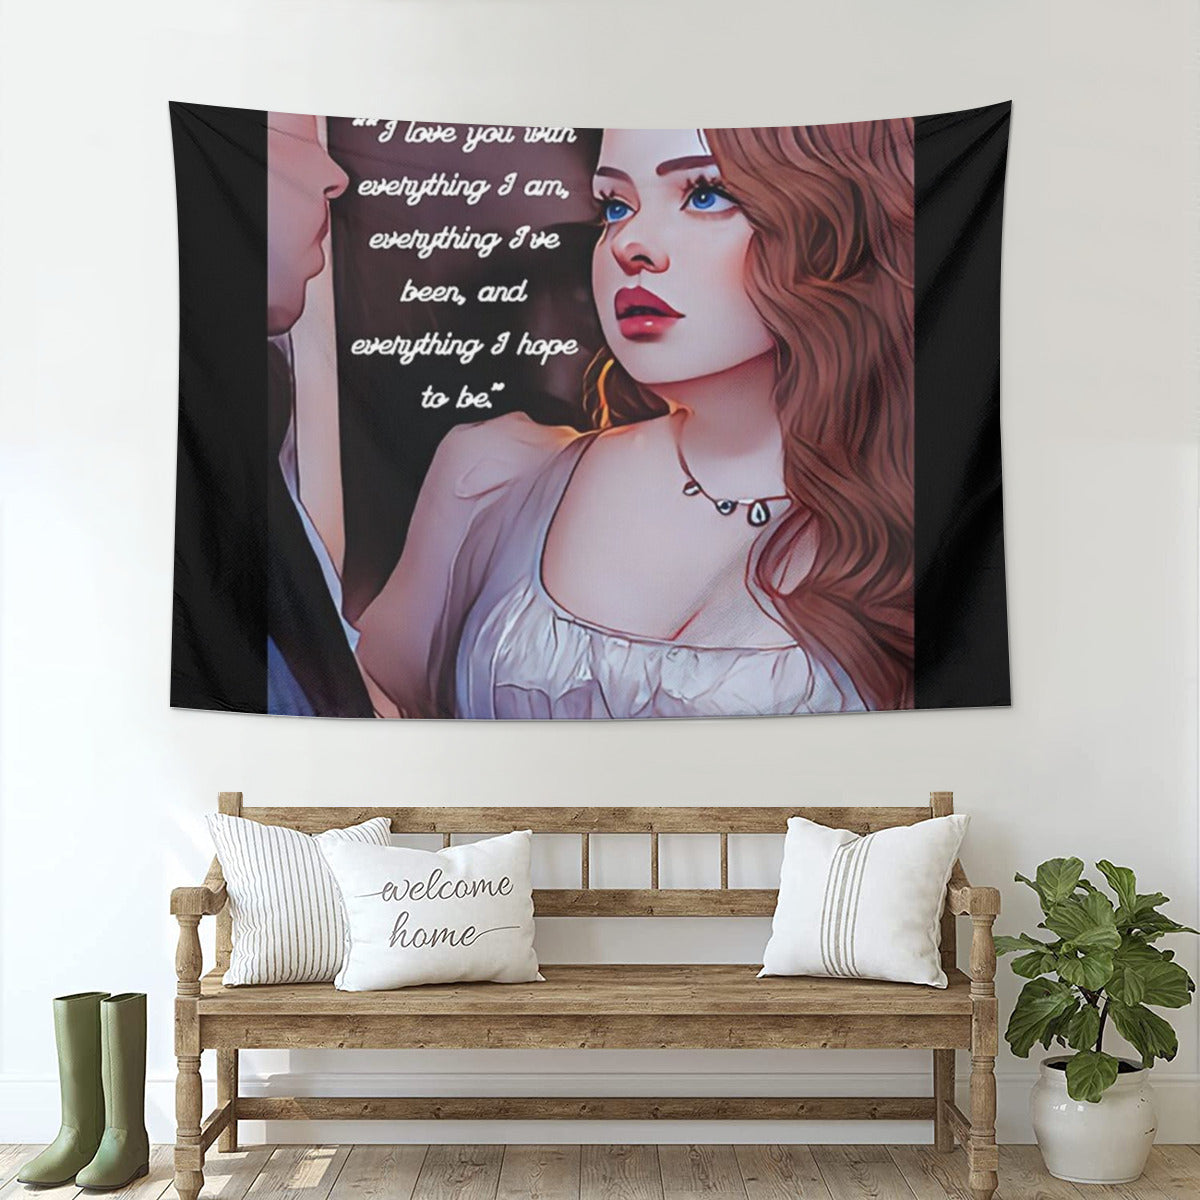 I Love You With Everything I Am Colin and Penelope Bridgerton Tapestry